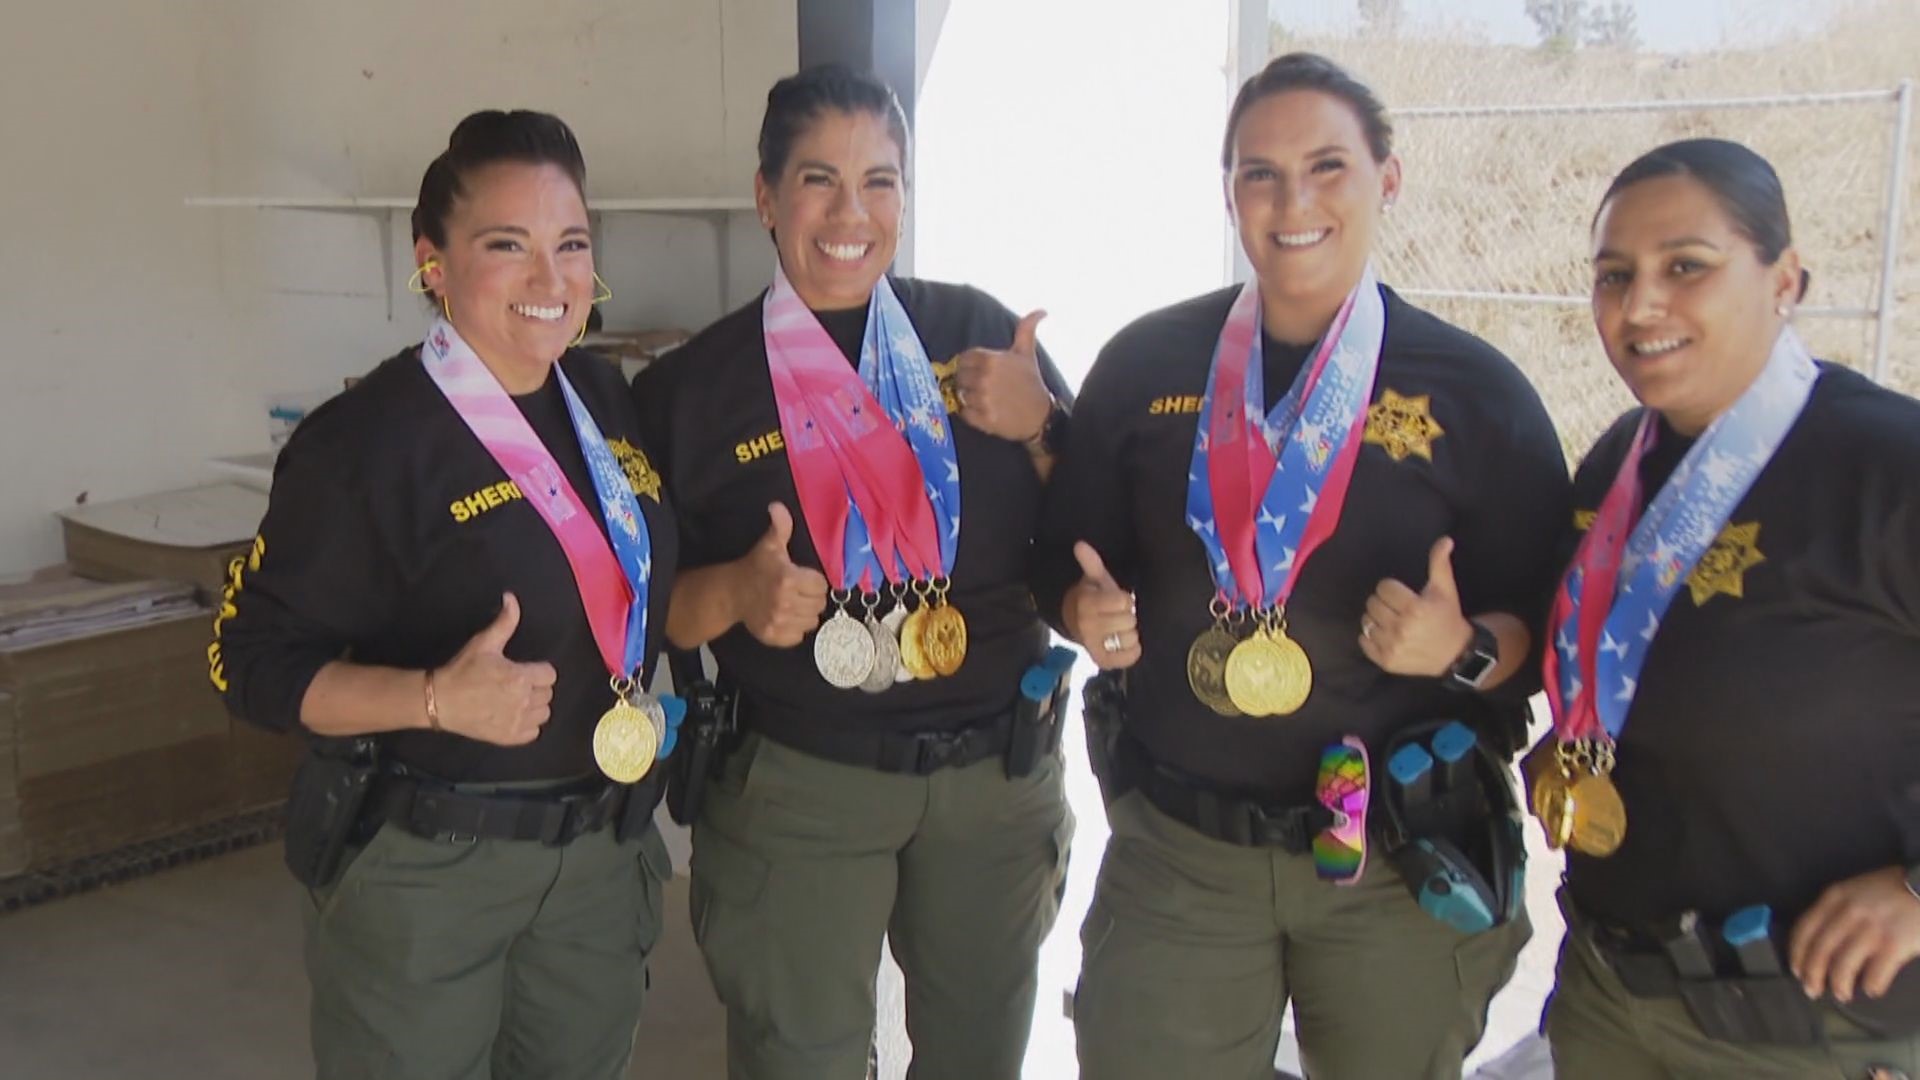 More than 100 law enforcement teams competed at the US Police and Fire Championships, but Gore's Gunners walked away with gold, silver, bronze & overall first place.